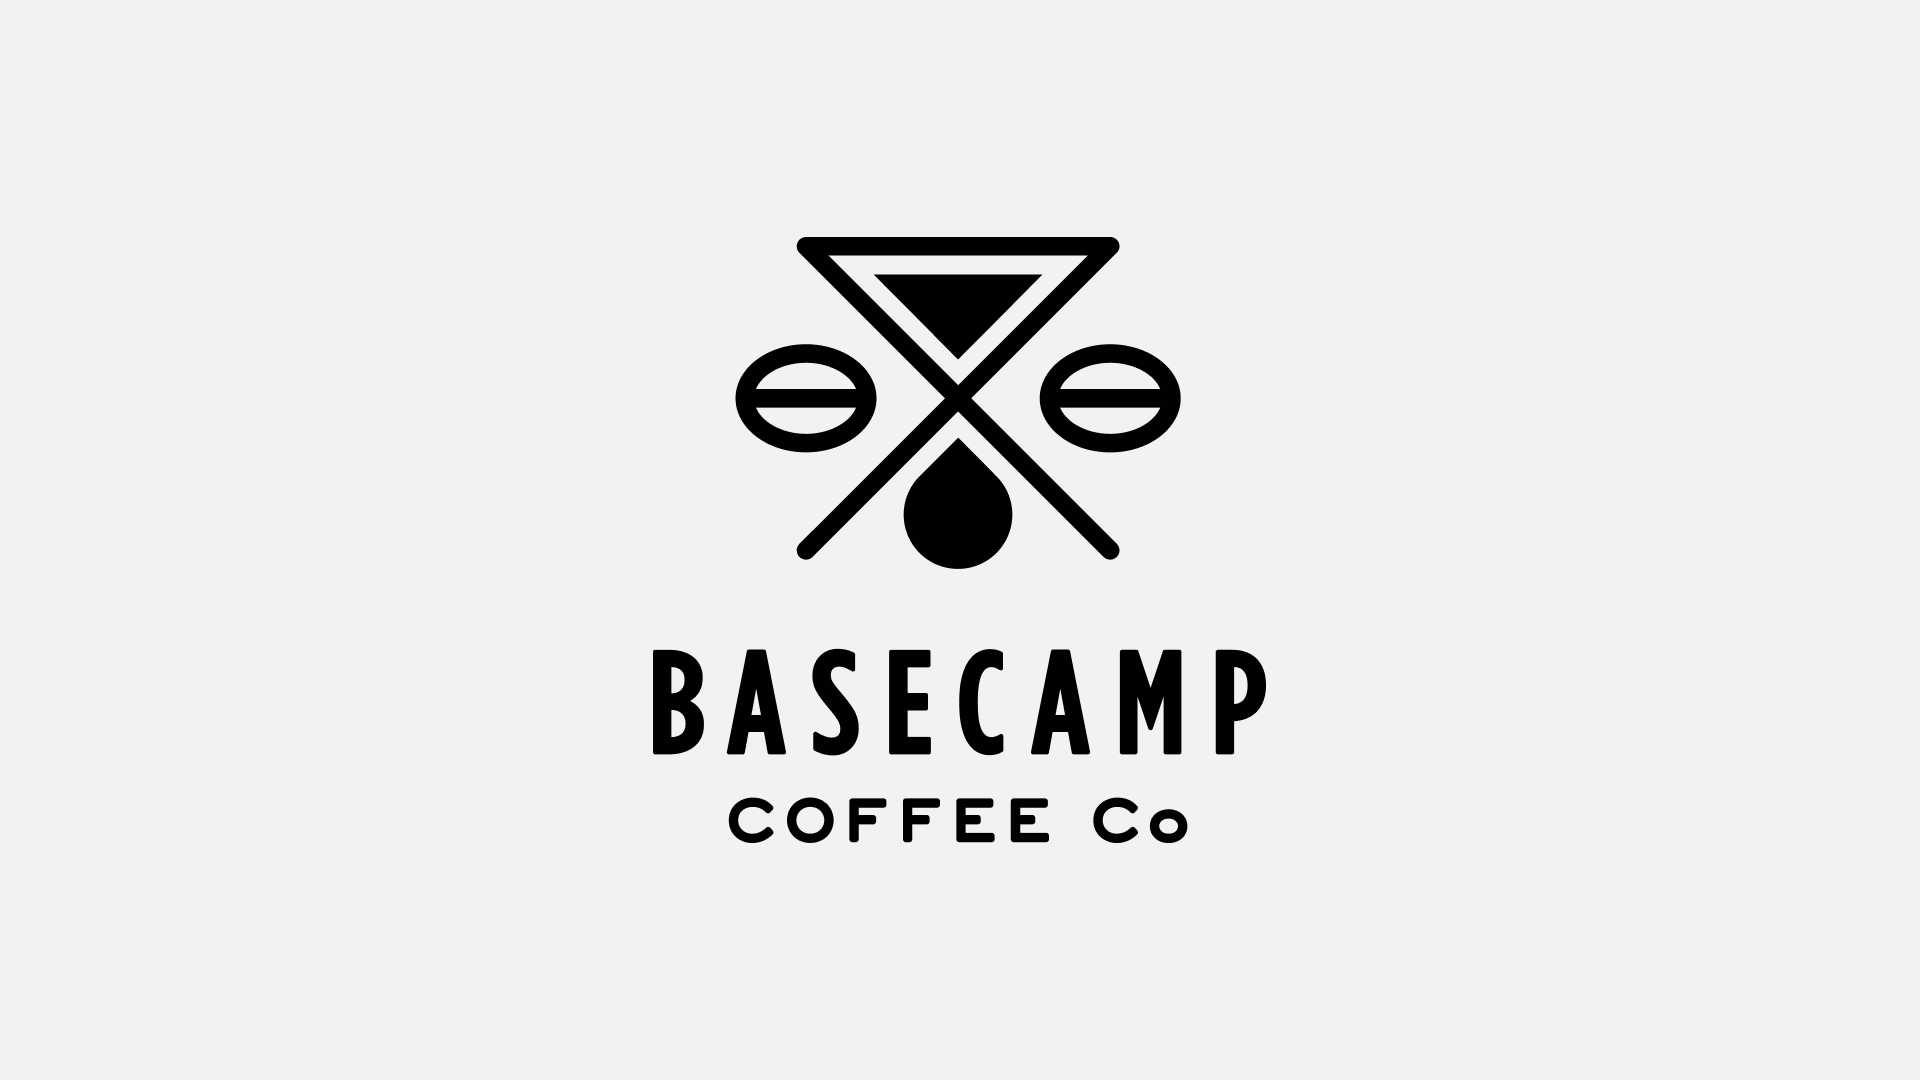 Logo with an x and two beans, based on the hobo symbol for safe camp with words Basecamp Coffee Co.